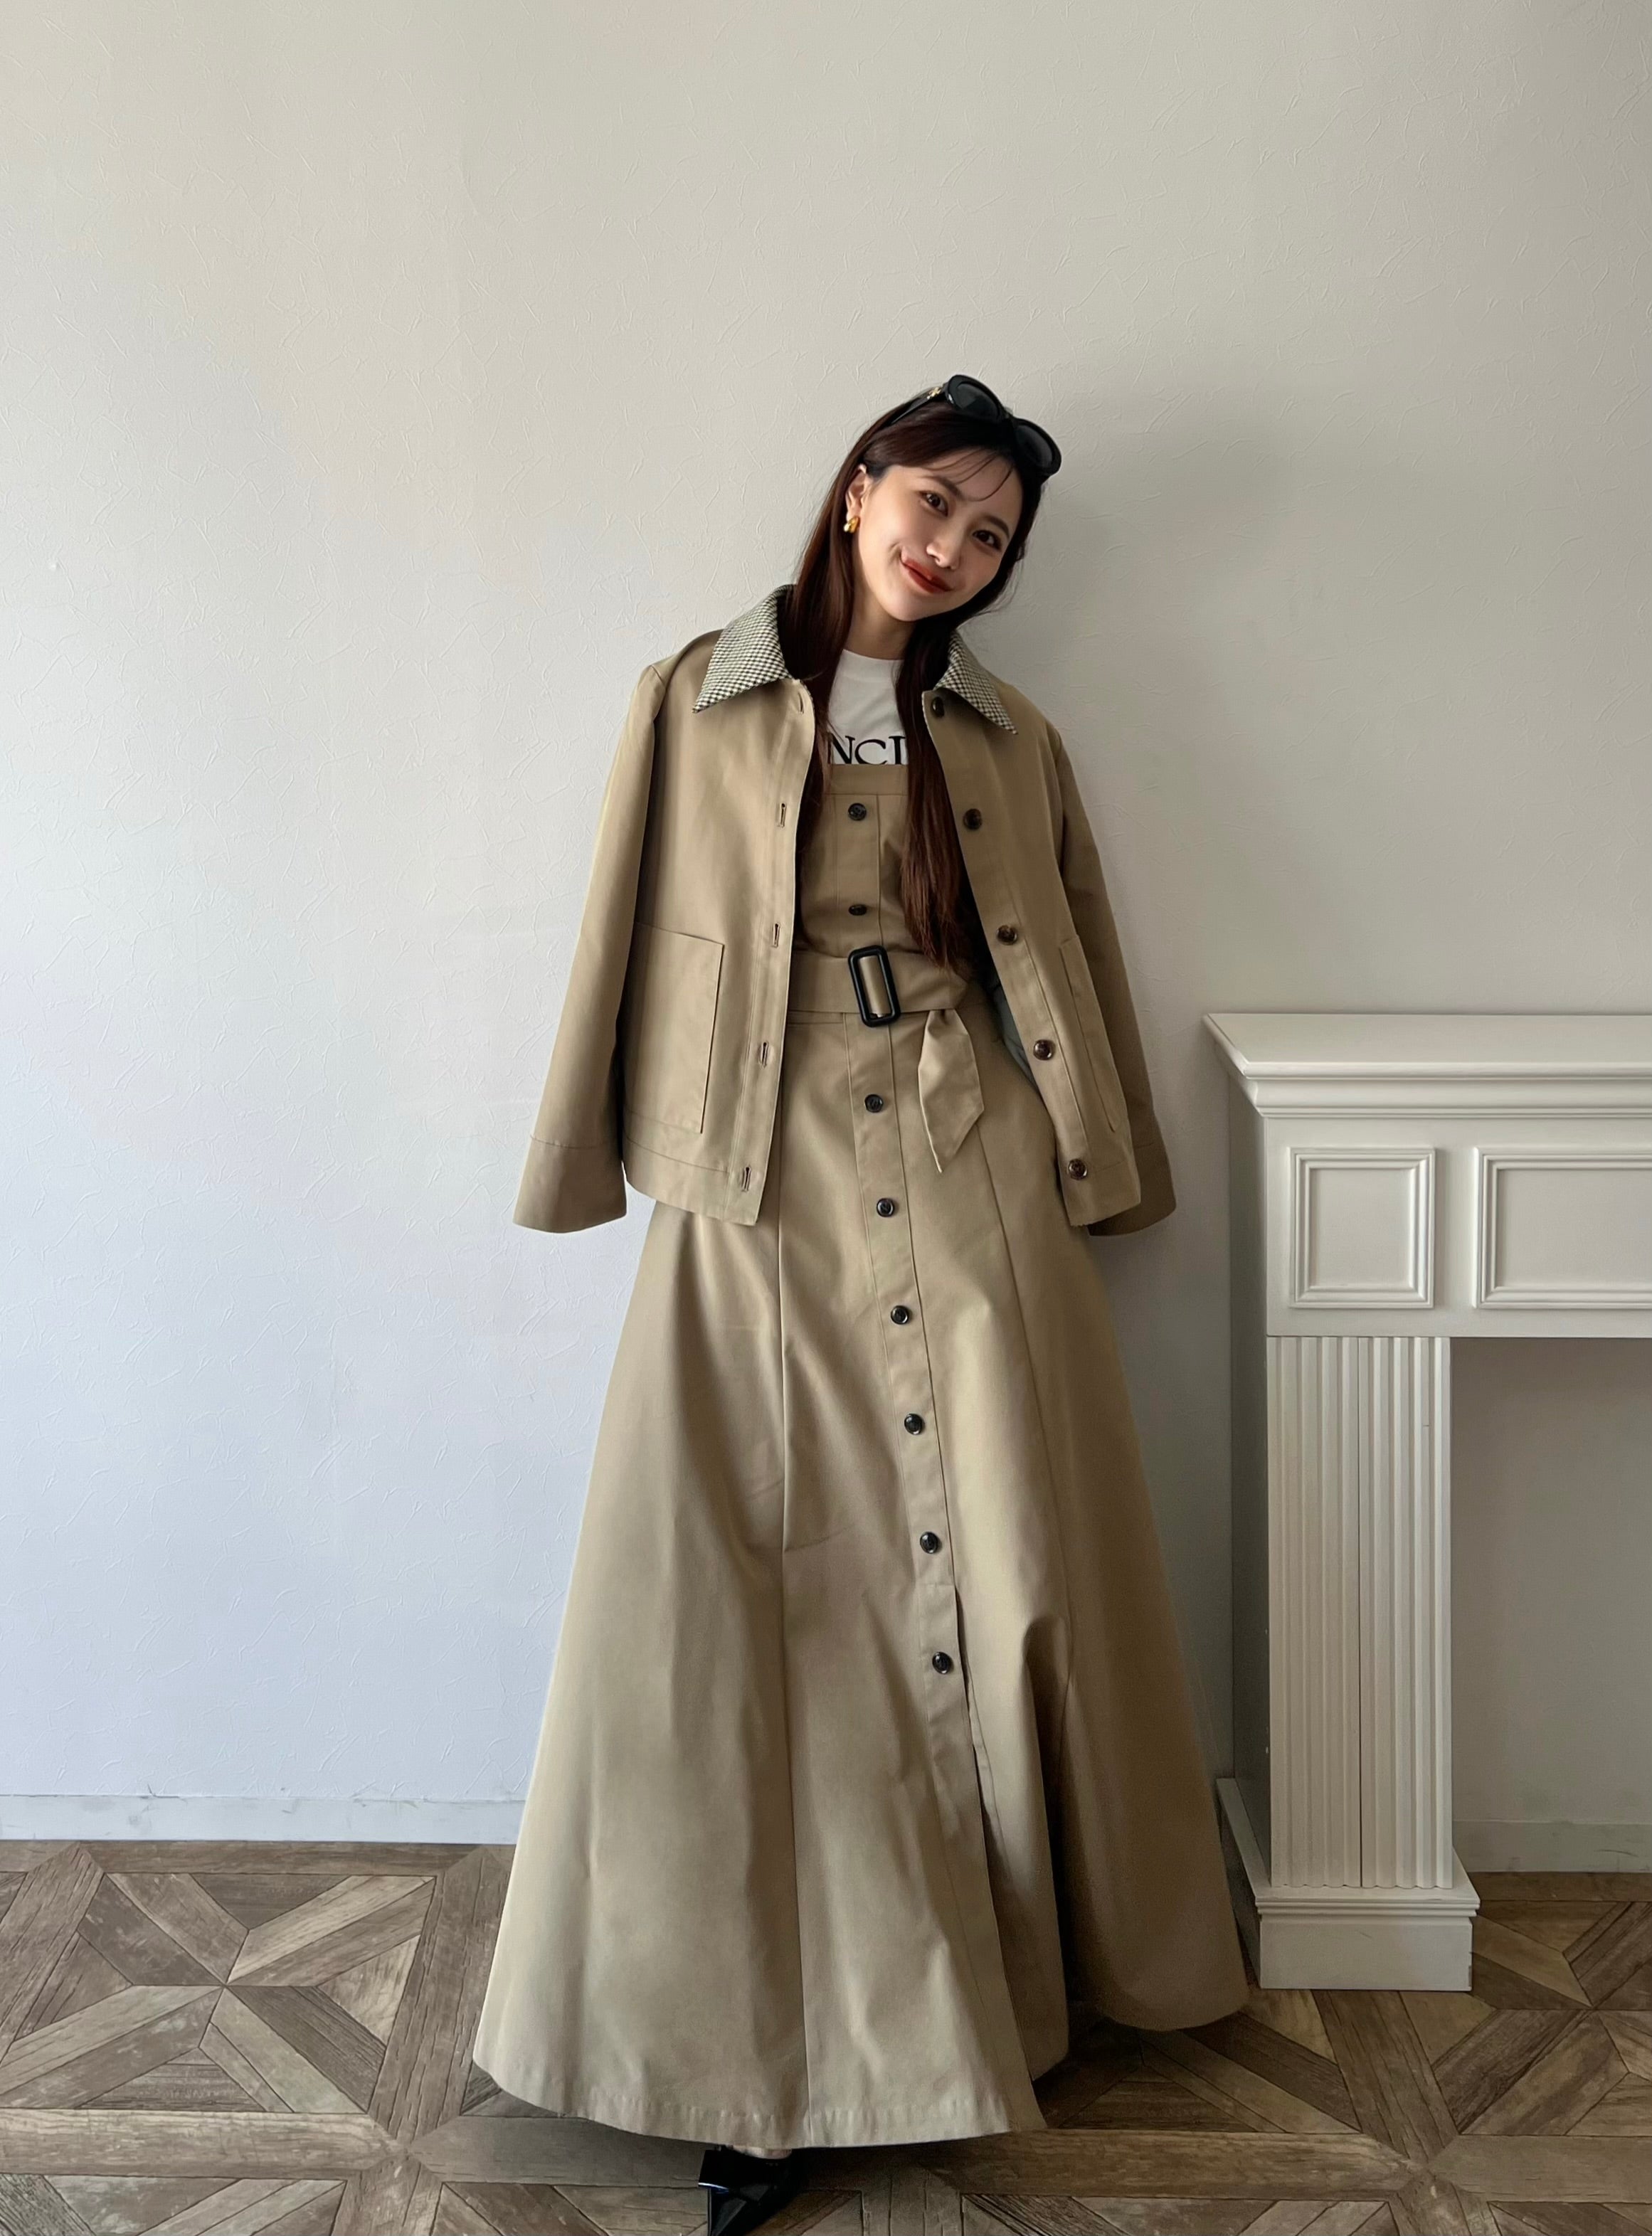 Bare top trench dress – RANCLIC